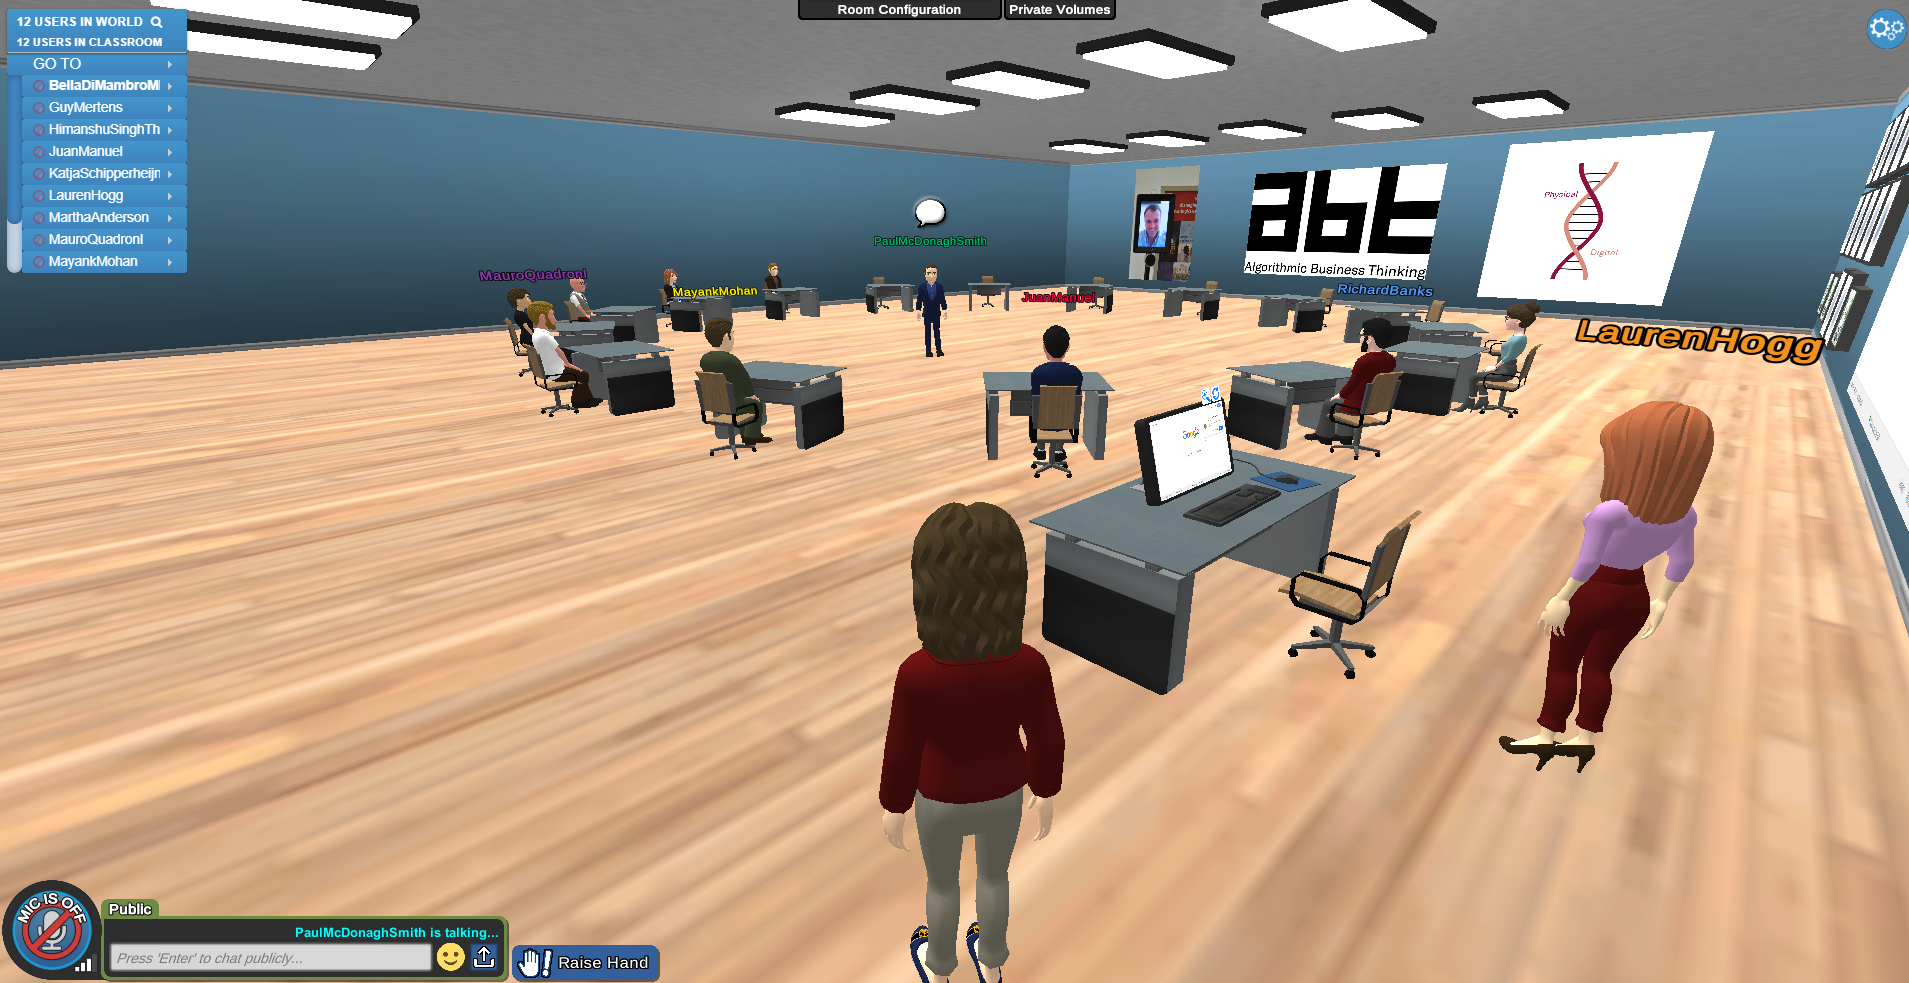 Student within MIT Sloan’s virtual center interacting with other students and faculty in a virtual simulation of a classroom.